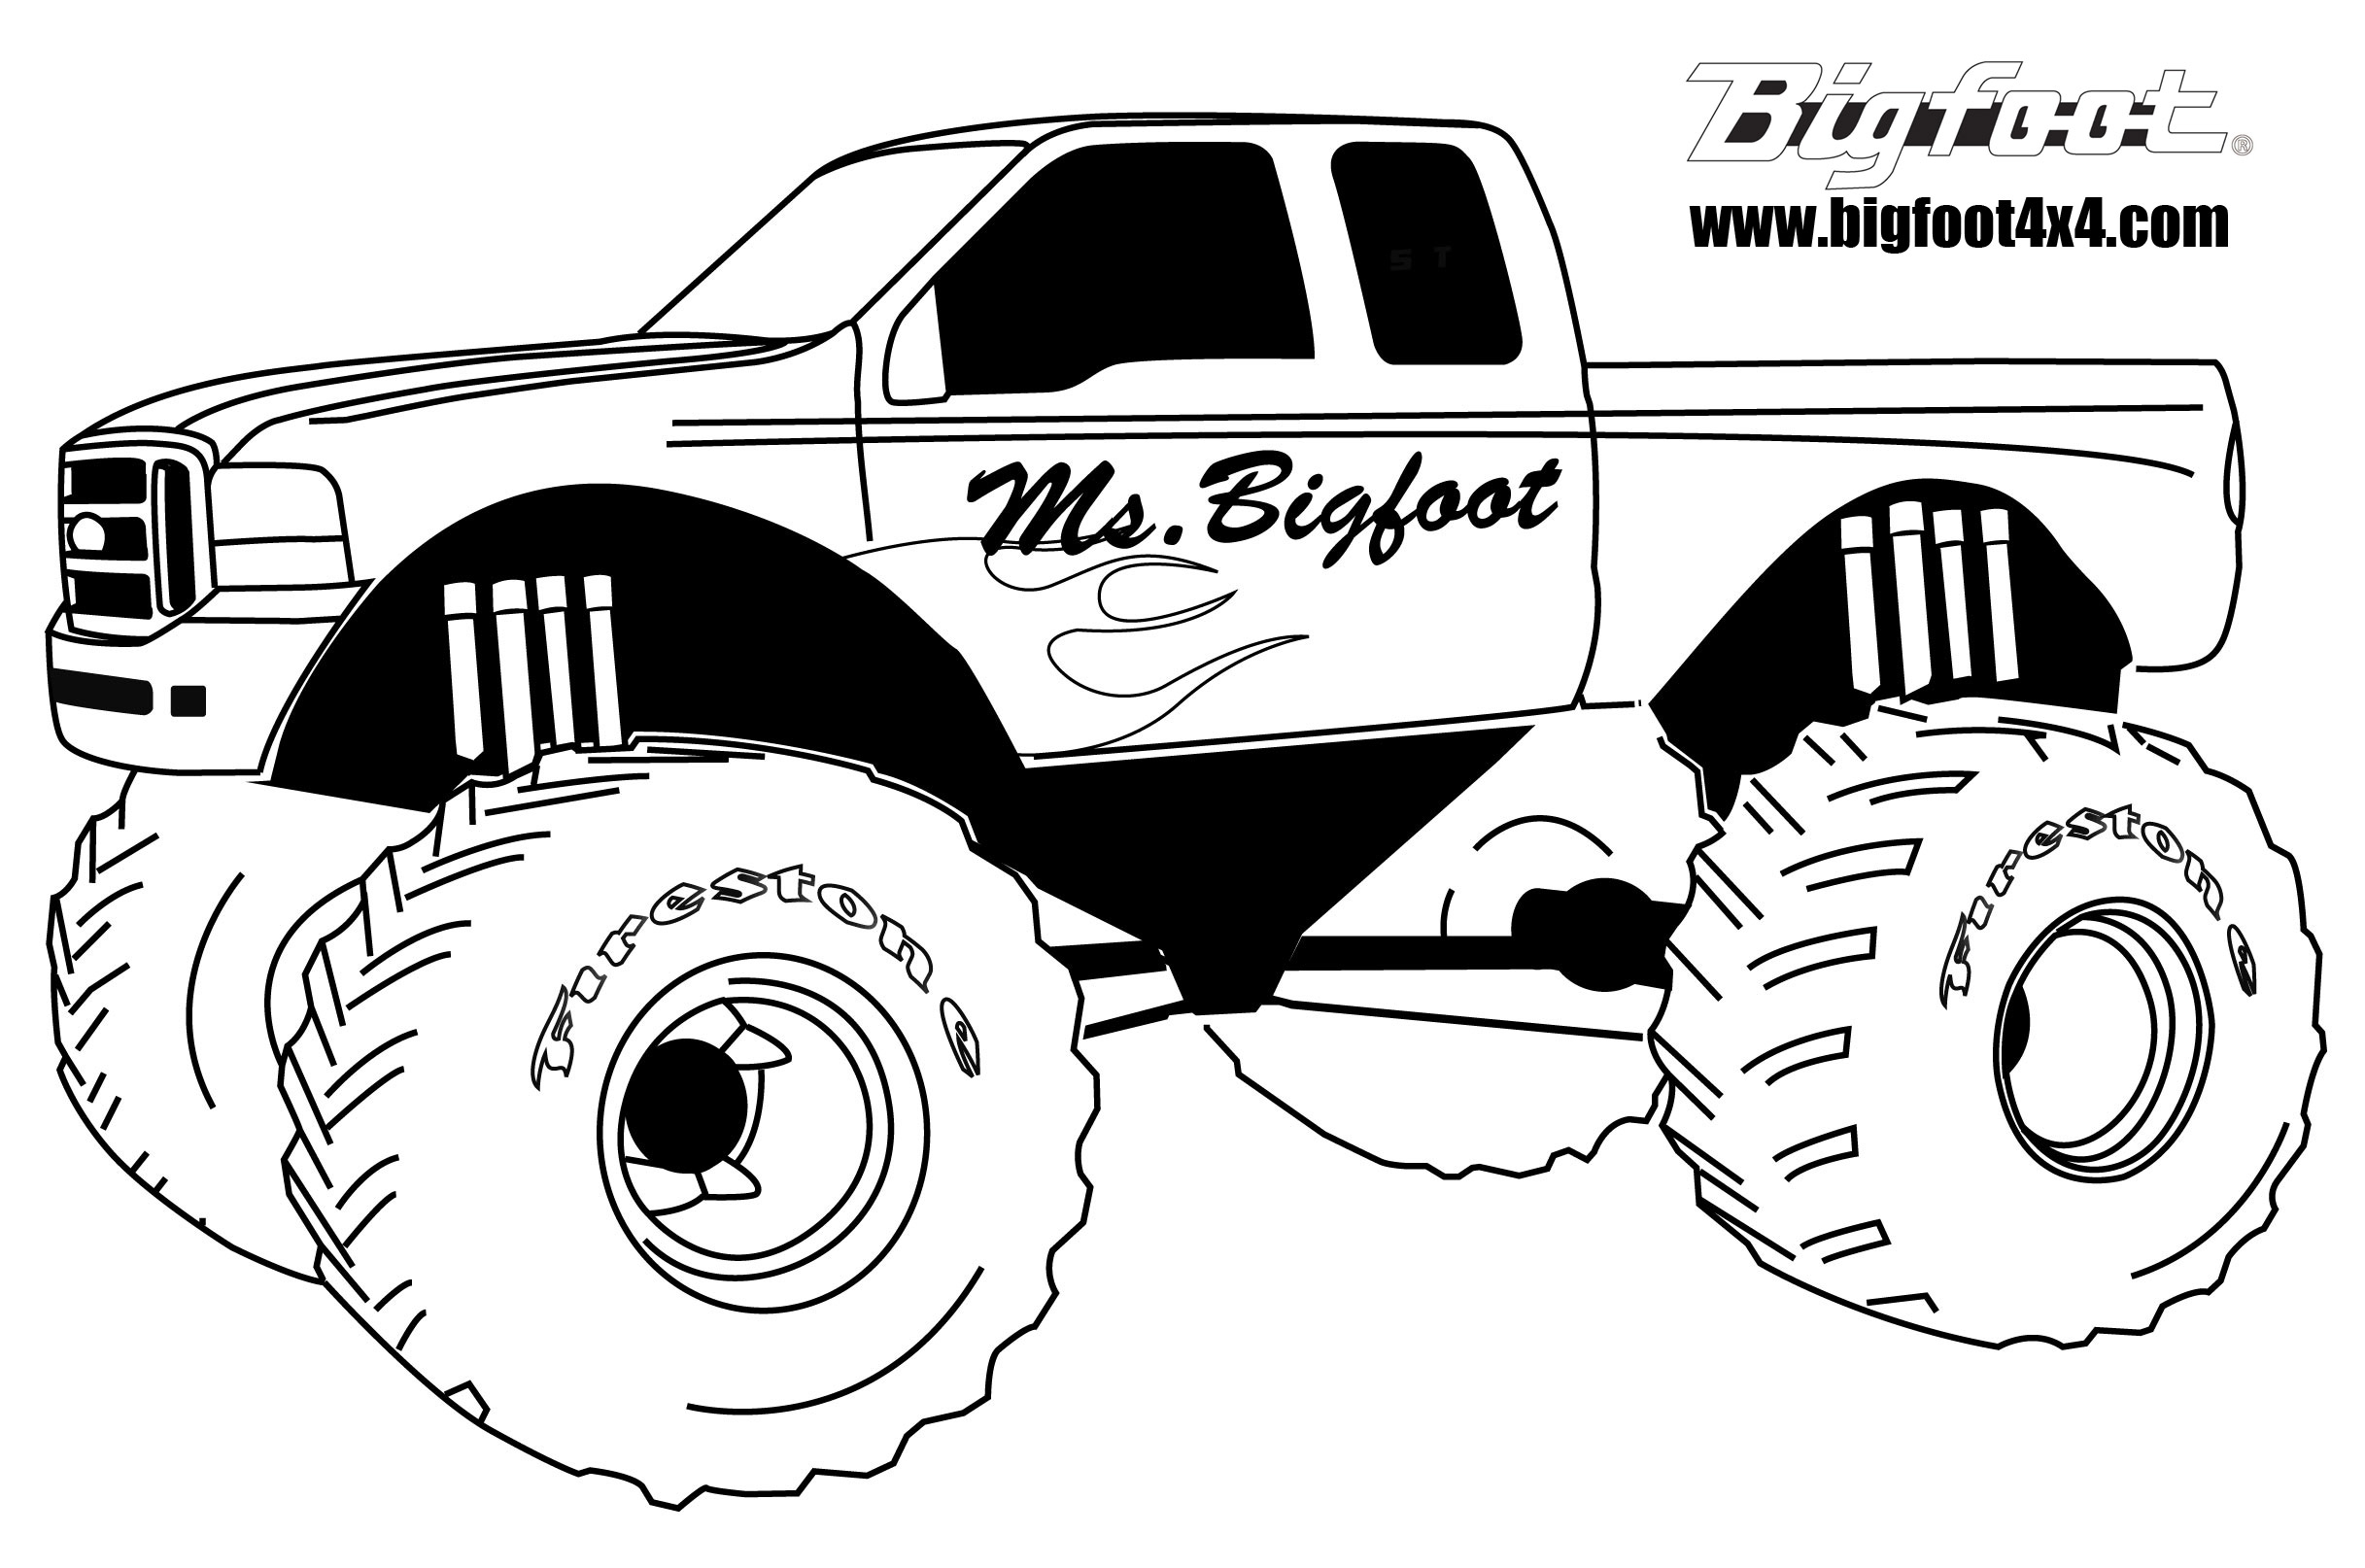 Big Truck Coloring Pages Coloring Pages Colorster Trucks Truck Coloring Pages Best Free